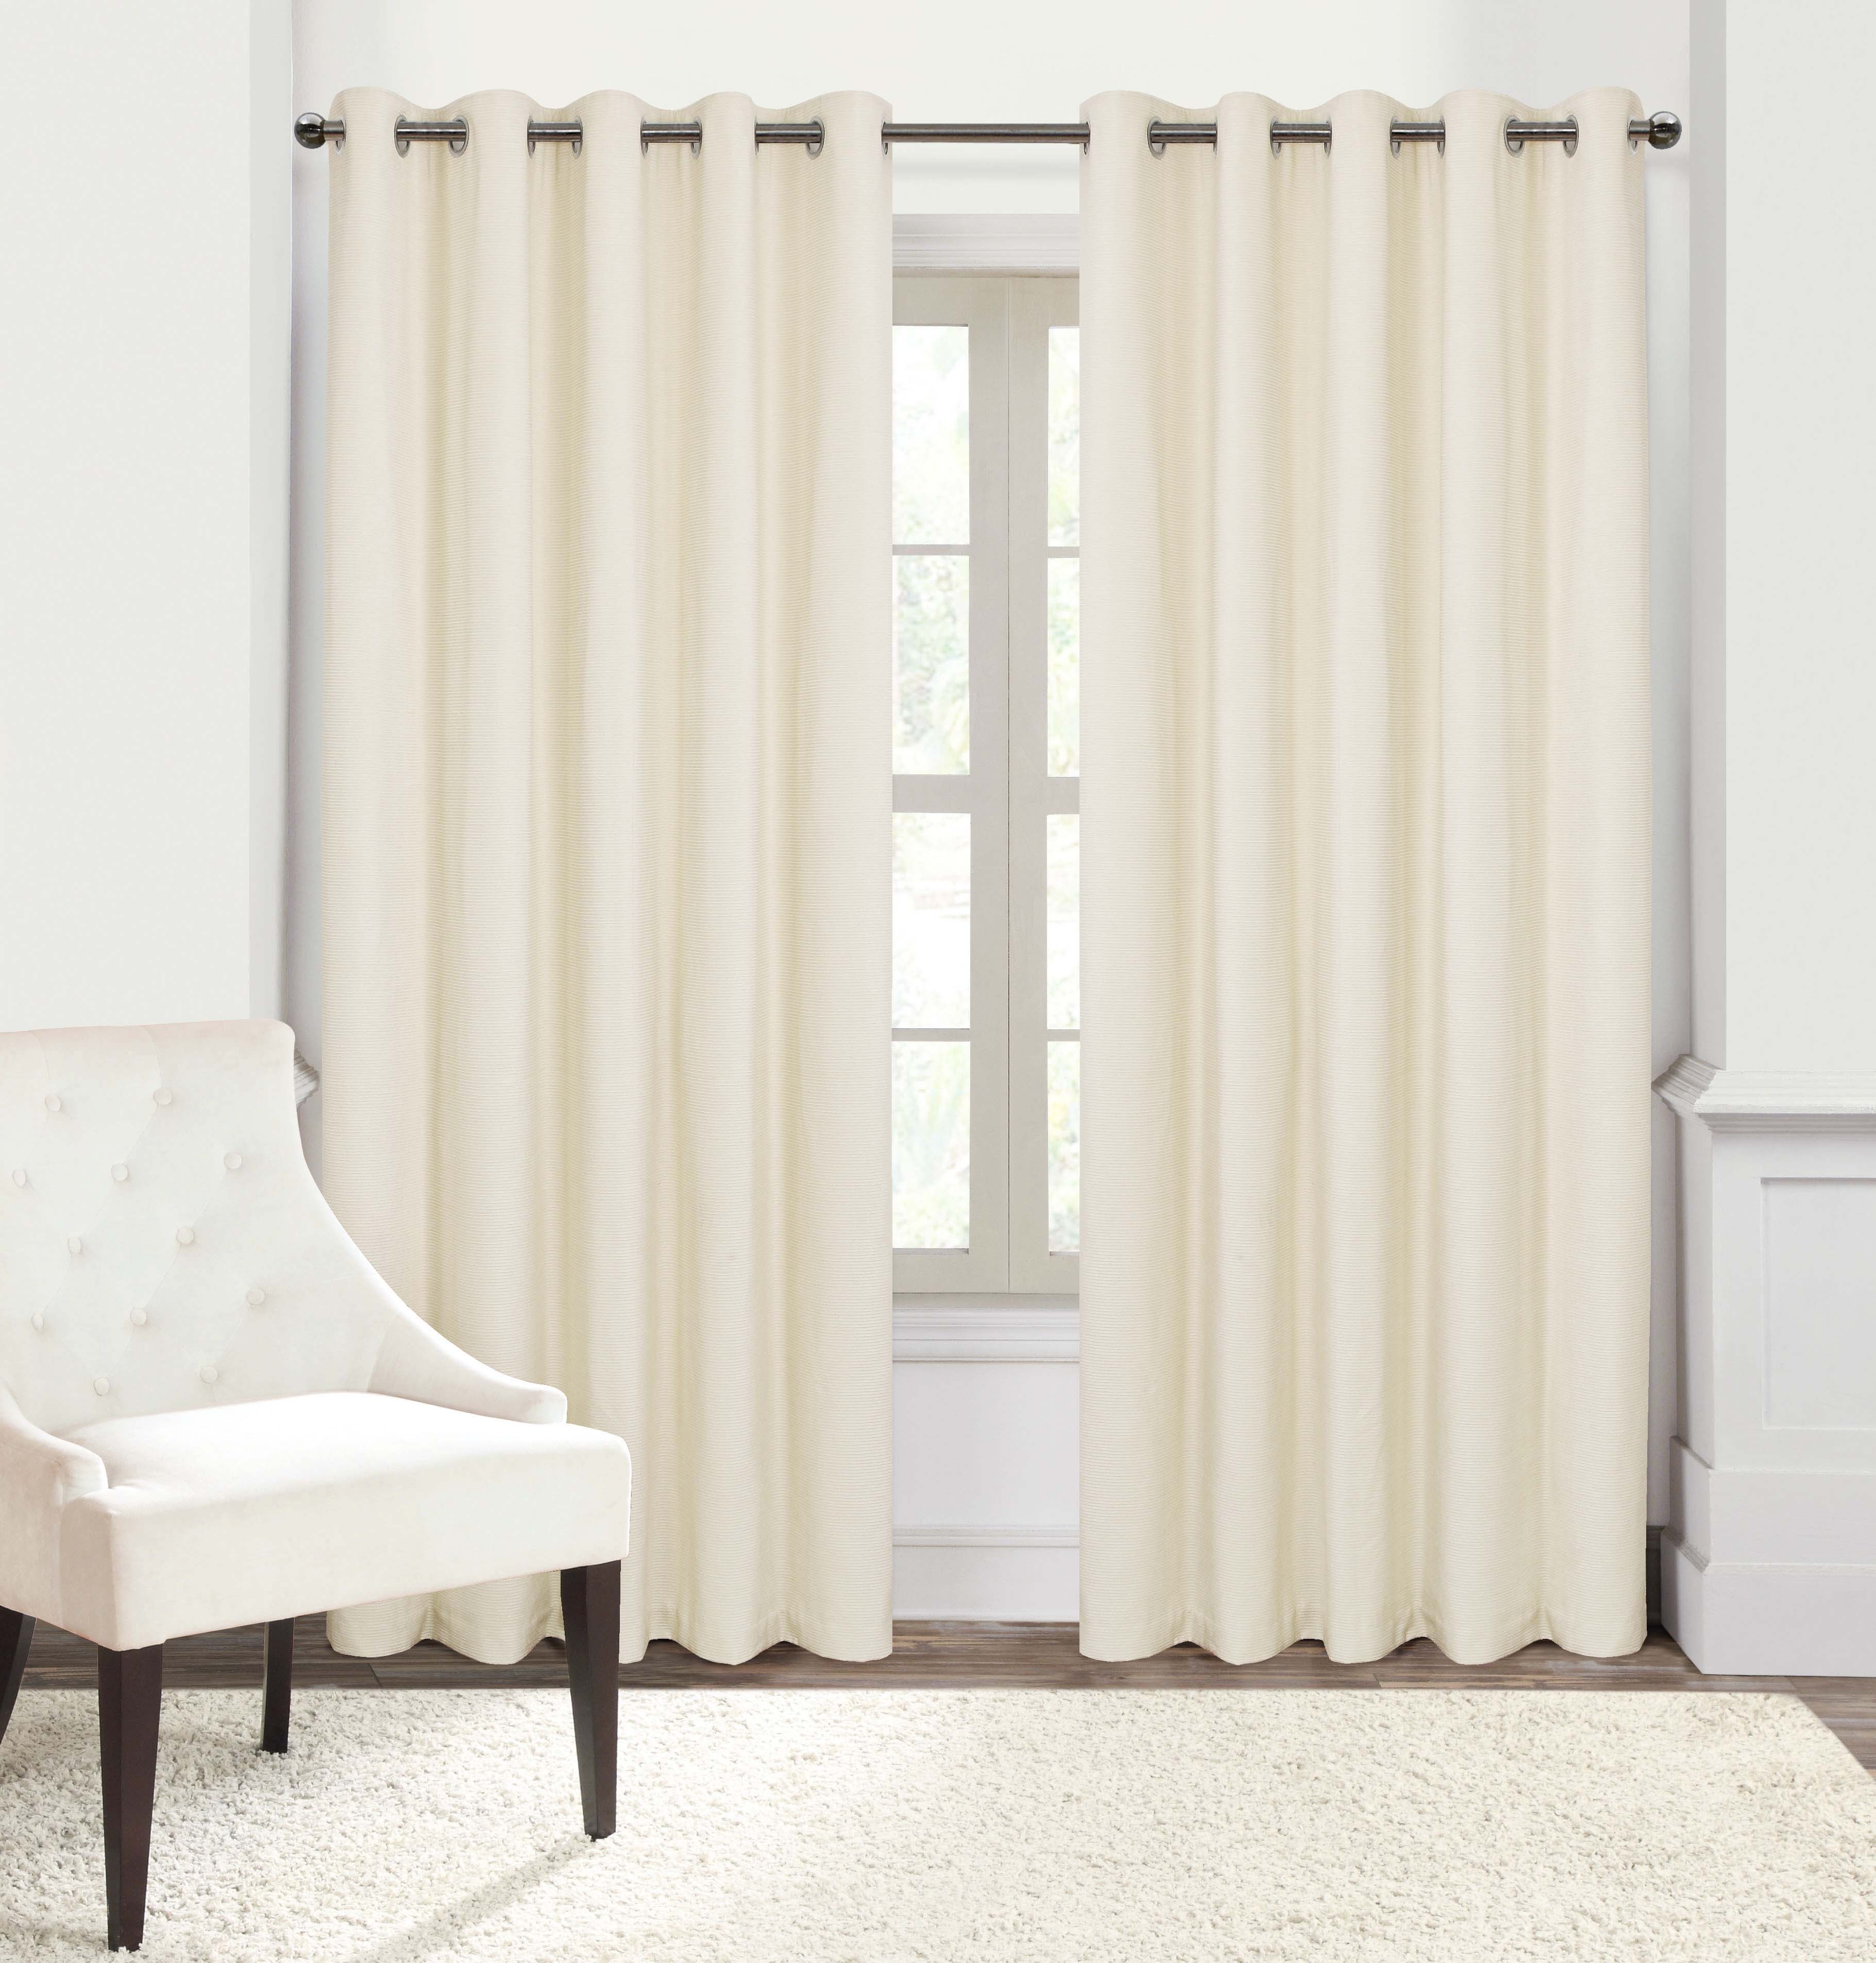 Tips on using cream curtains in your home – decorafit.com